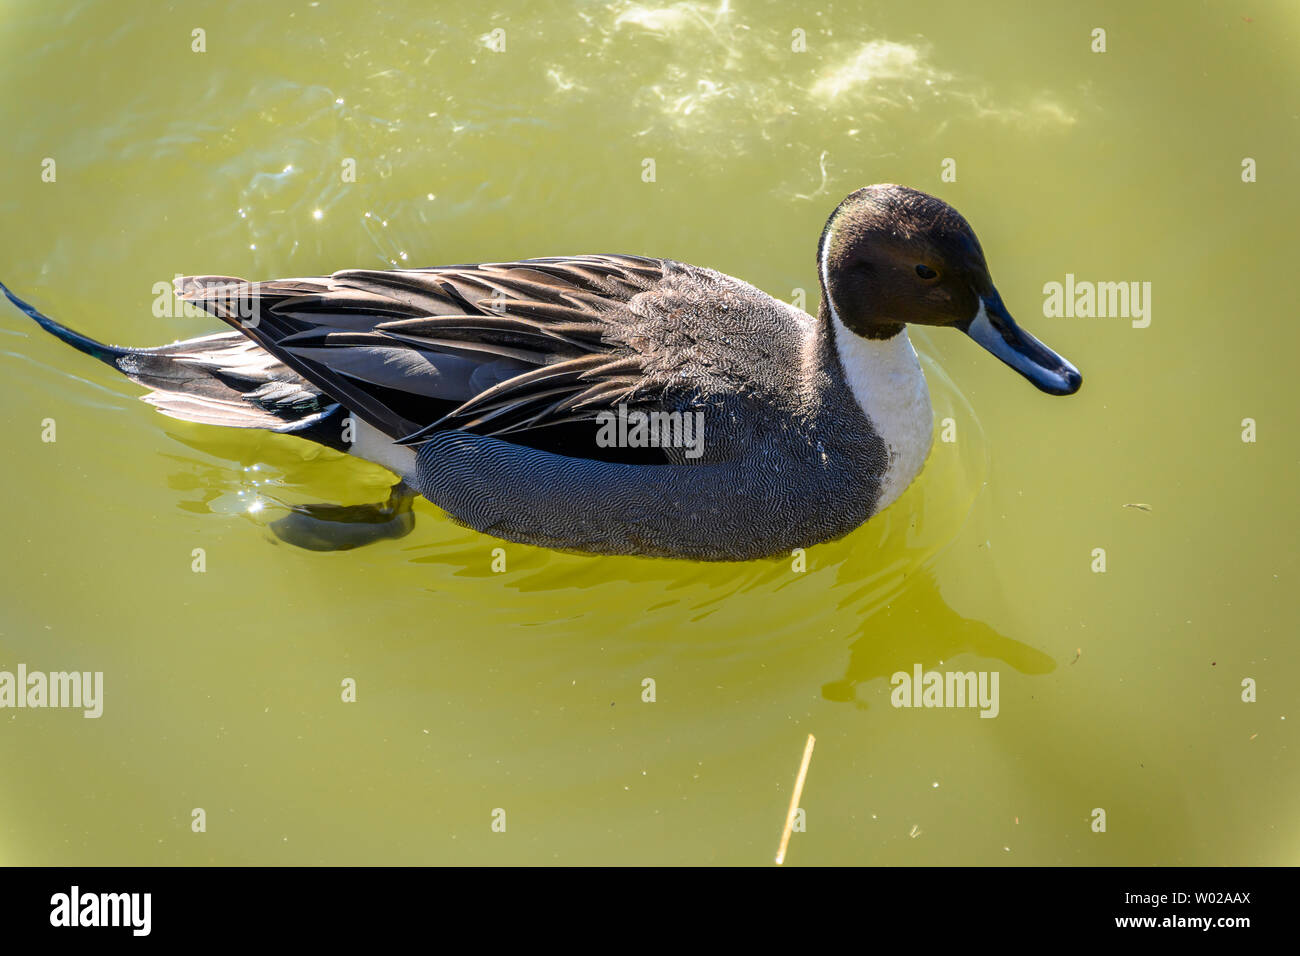 Multiple valuesBeautiful northern pintail male duck swimming in the lake.Brown head, orange and green stripes, white chest, long tail feathers. Grey b Stock Photo